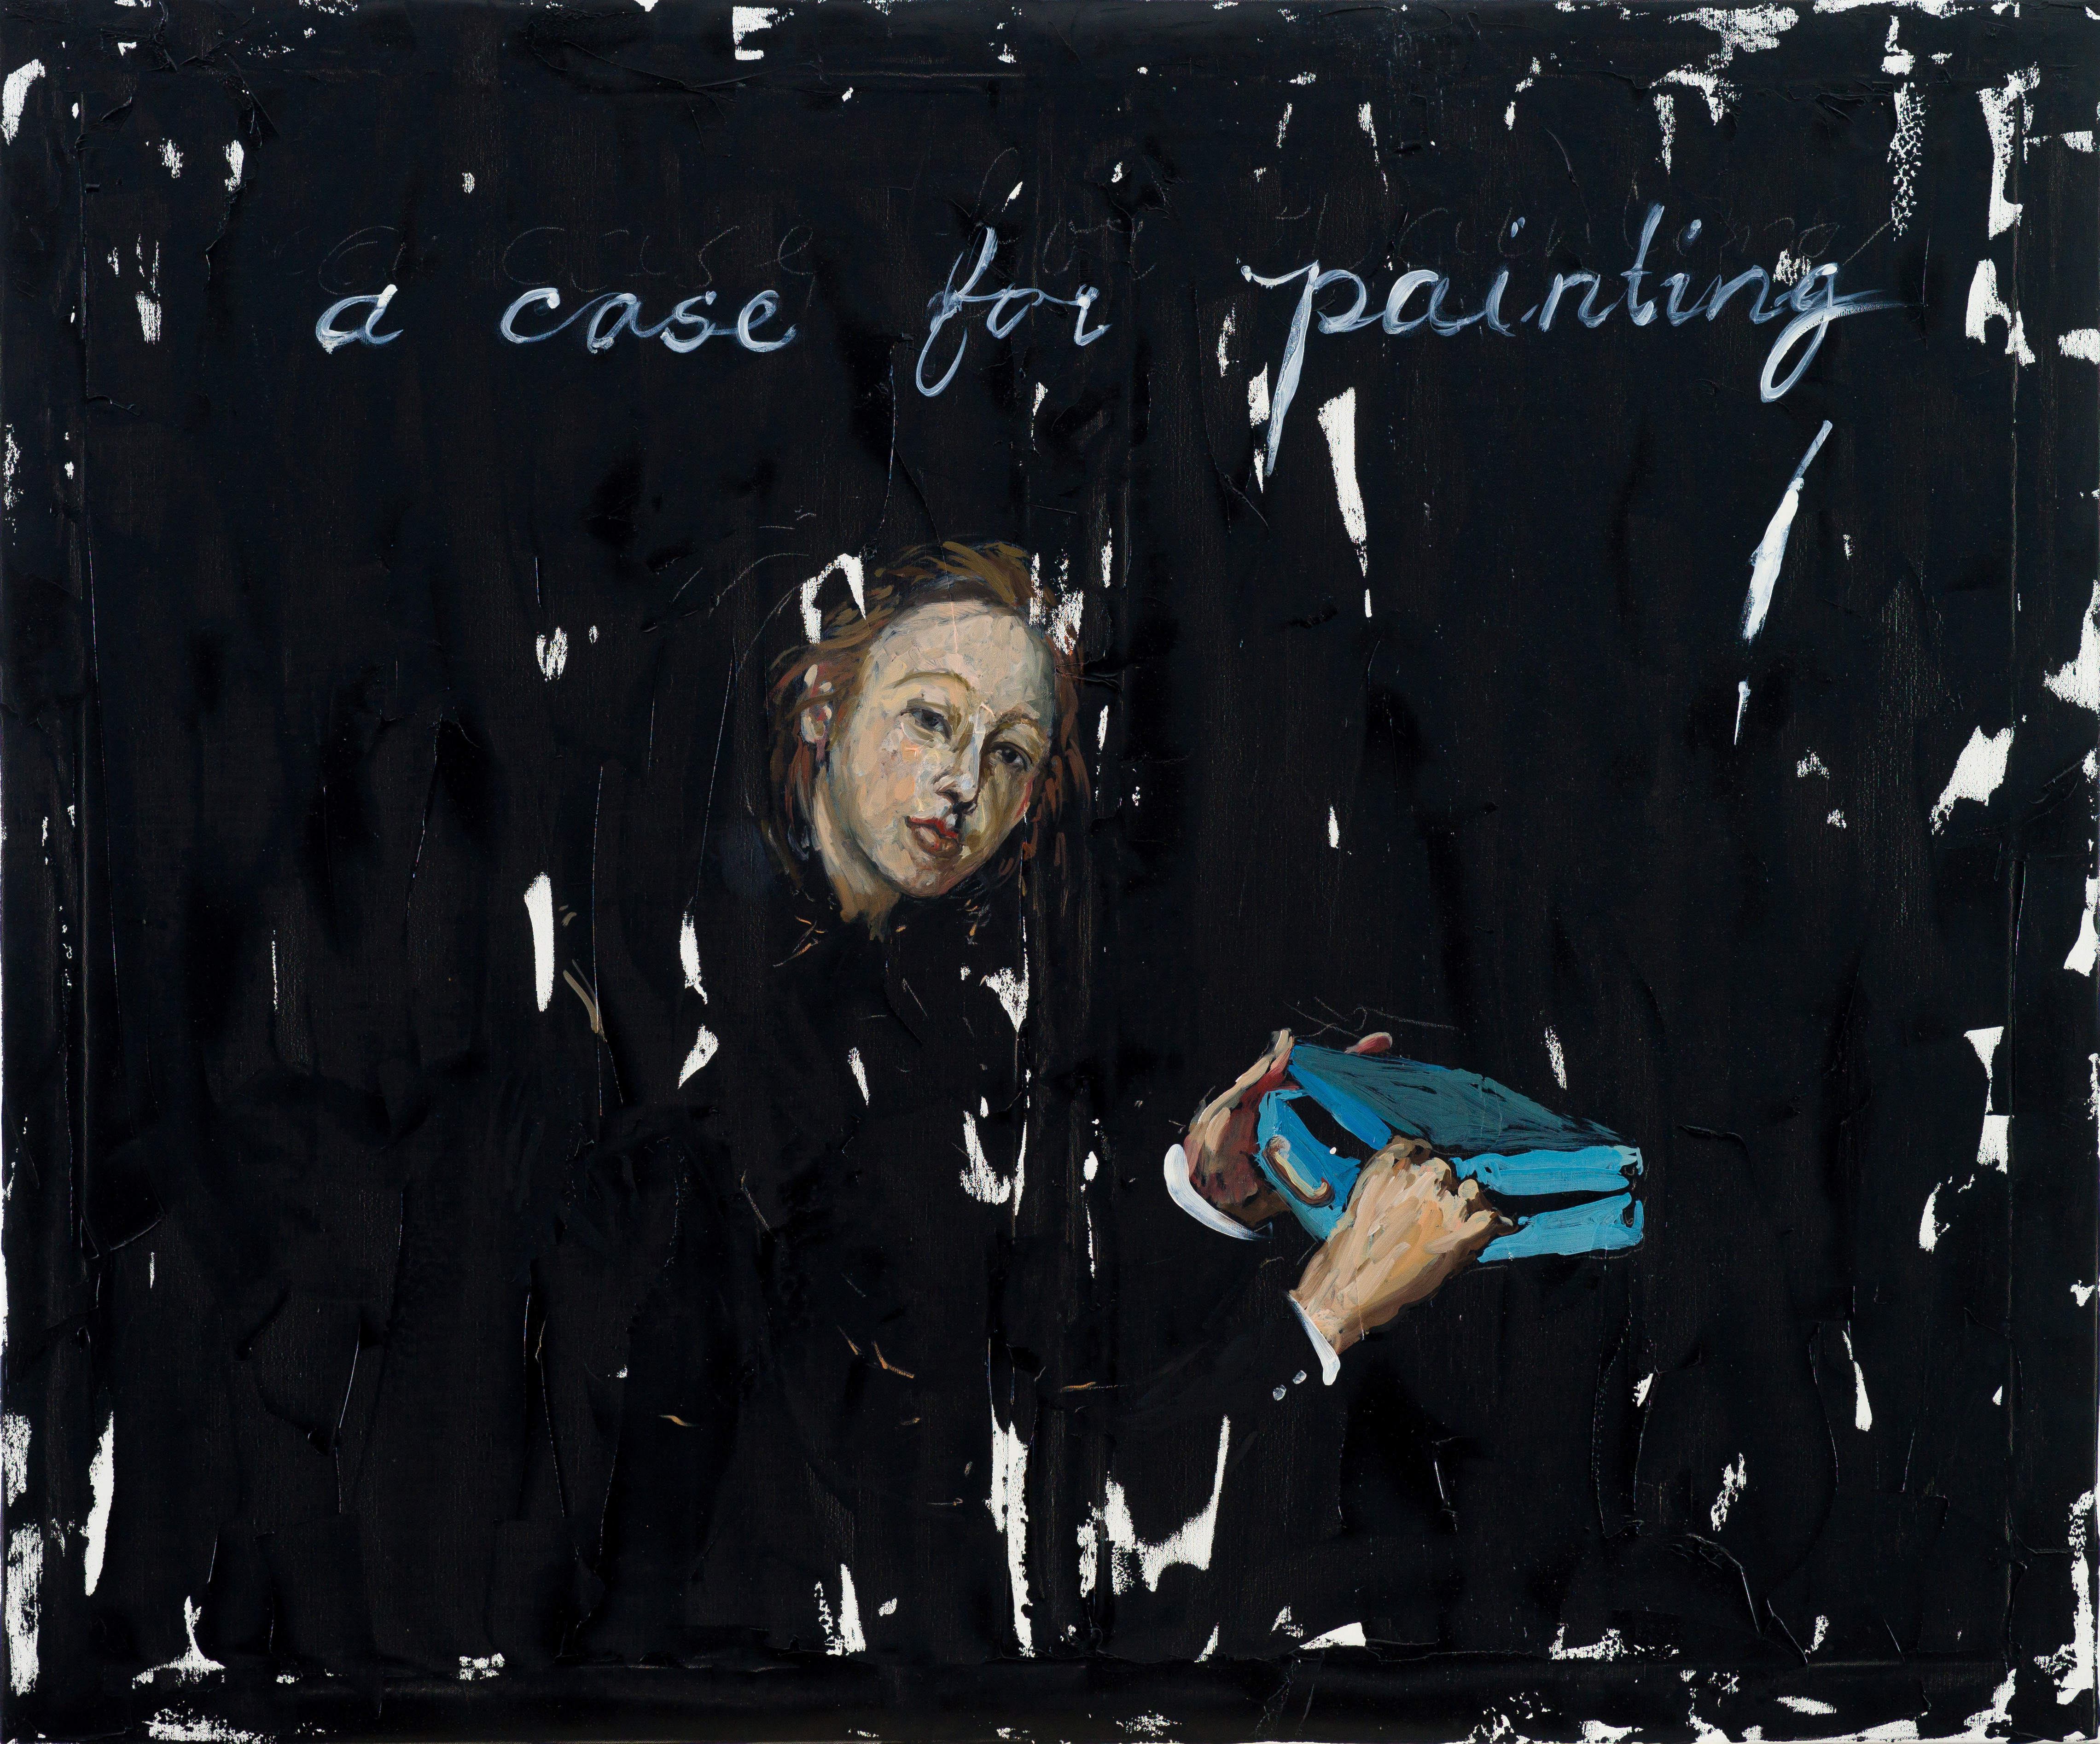 Claire Gavronsky; A Case for Painting